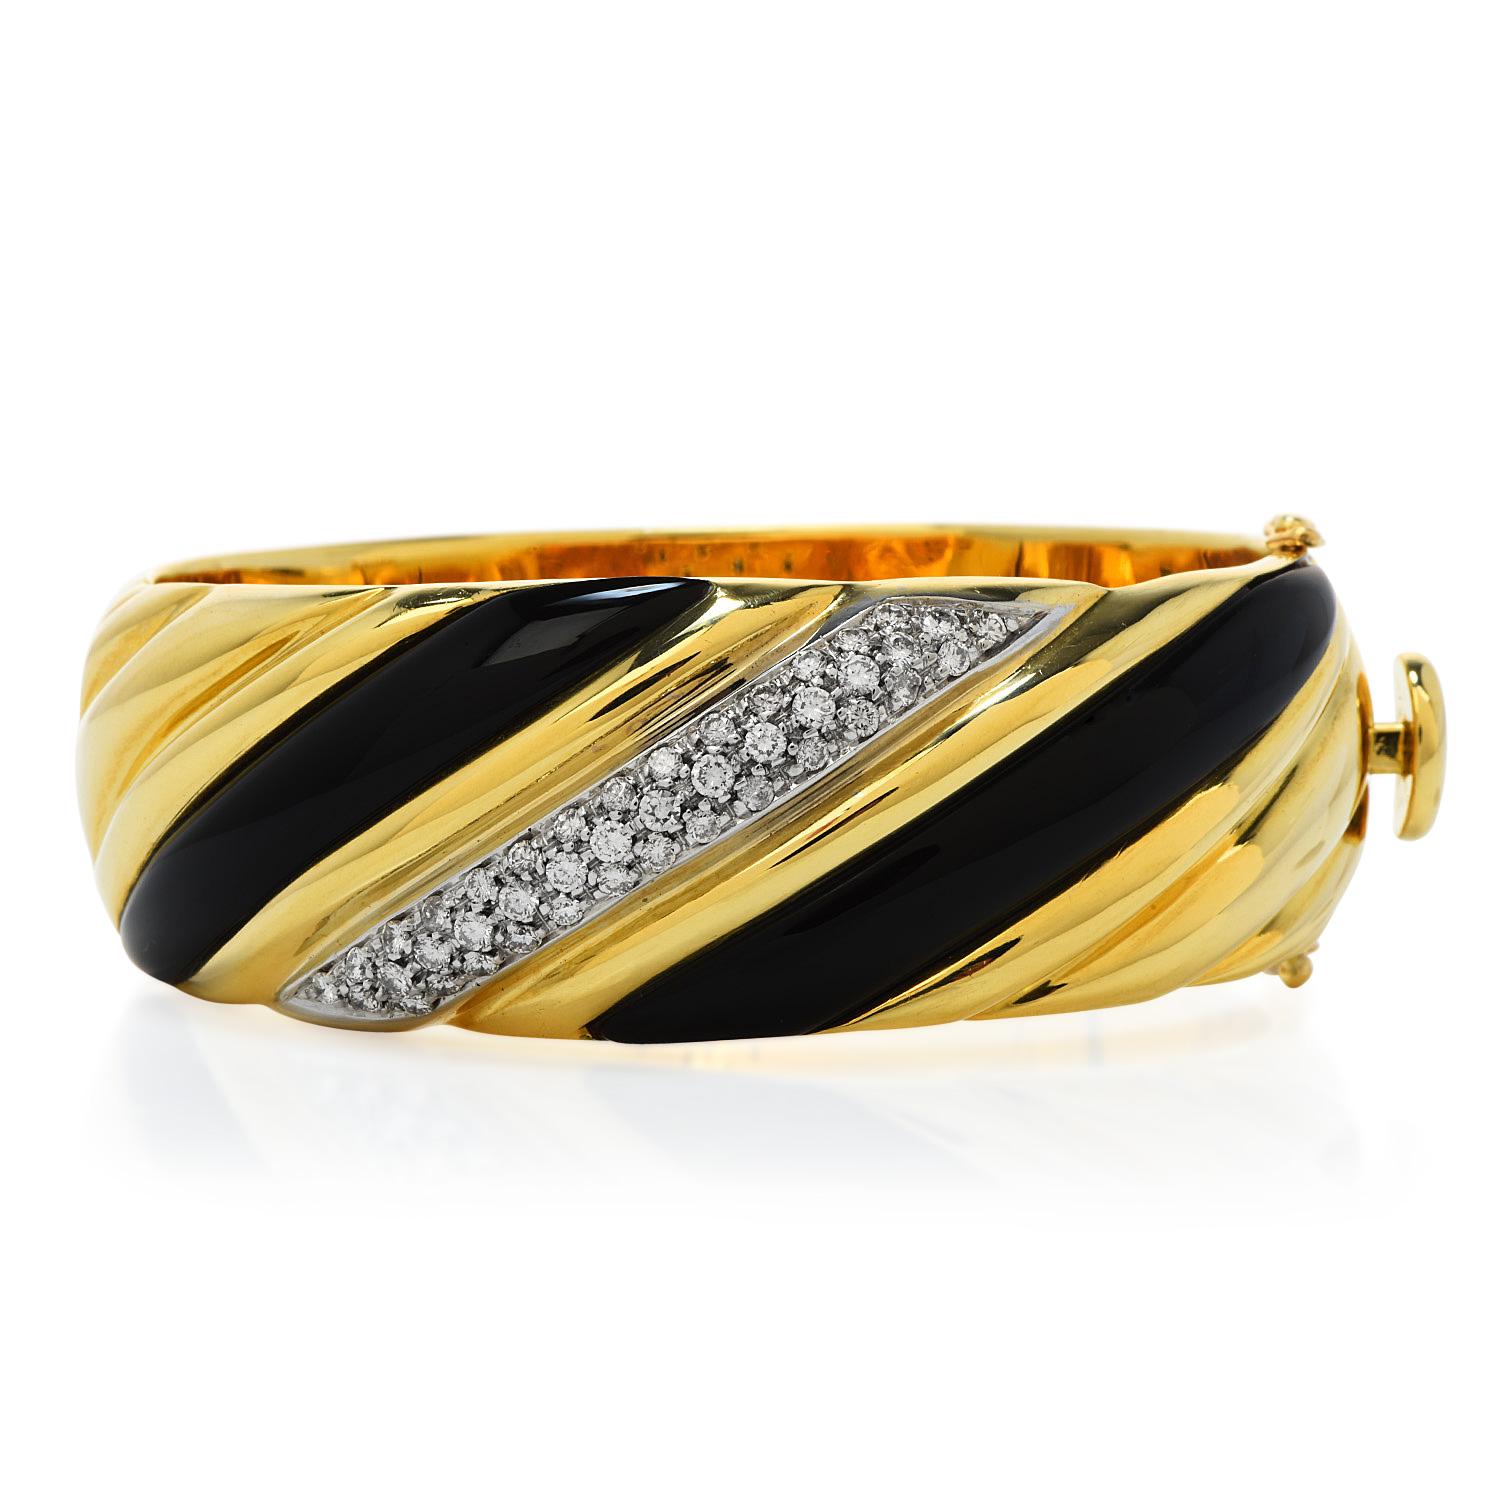 Stand out from the crowd with this statement bracelet.

this 1980S piece is crafted in 18K yellow gold. This exquisite bracelet , has a striped channeled design made of a cluster diamond center & two highly polished black onyx